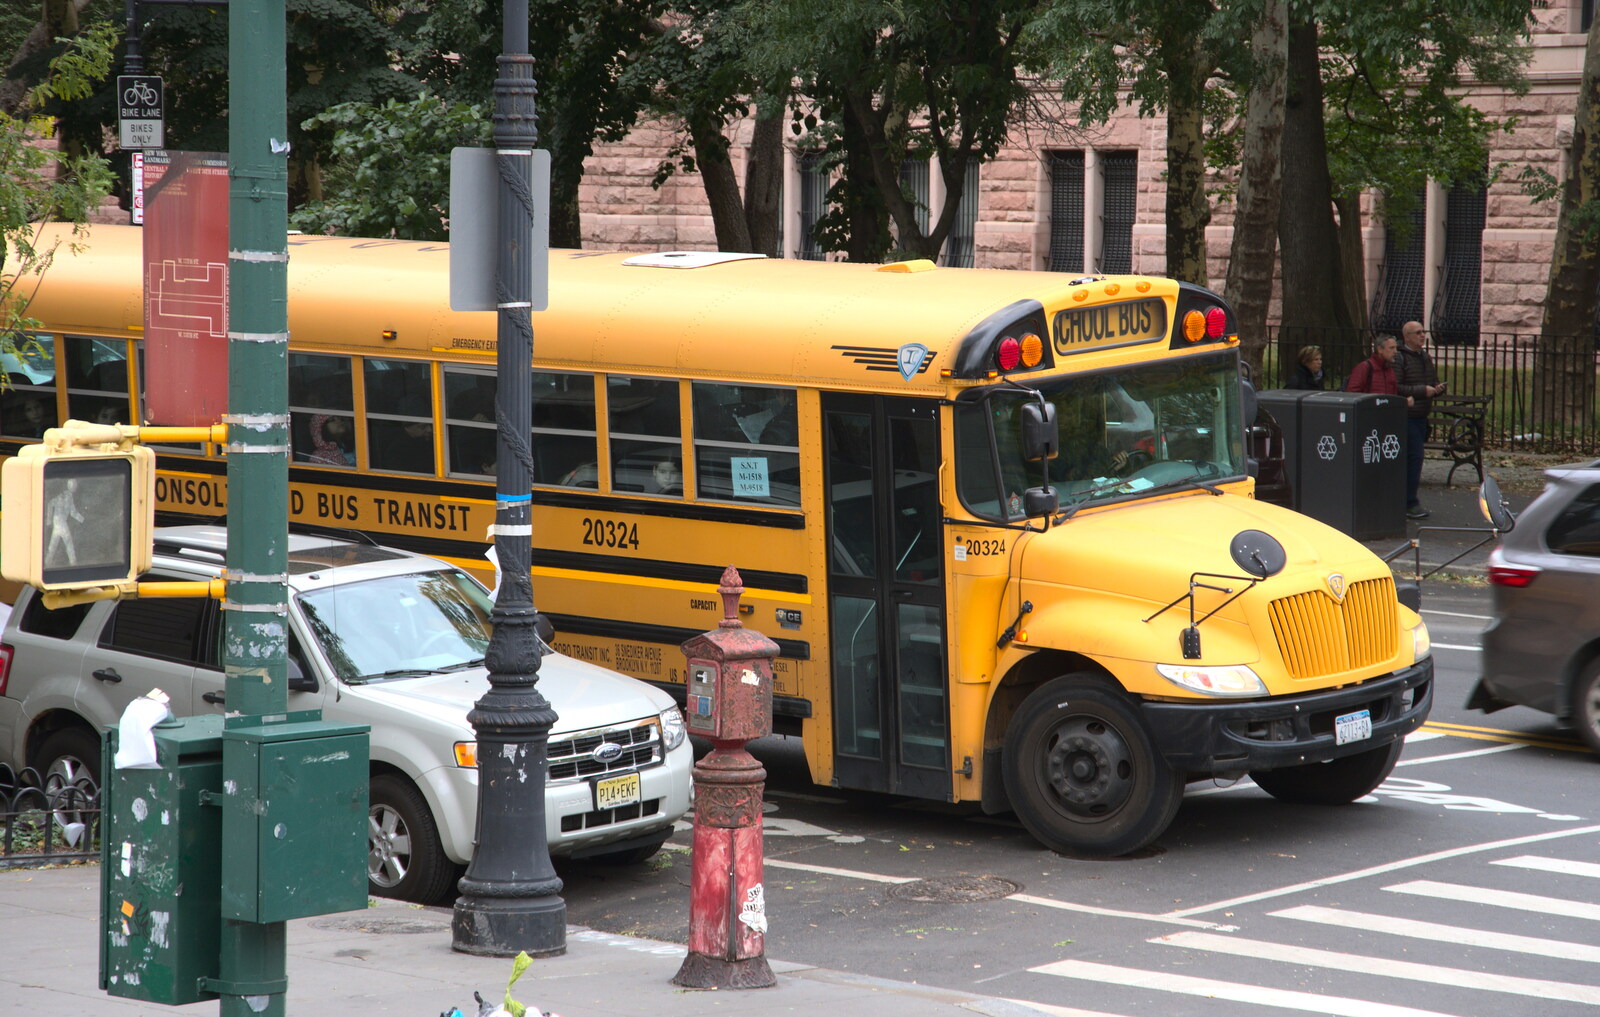 A classic school bus from Open-top Buses and a Day at the Museum, New York, United States - 22nd October 2018